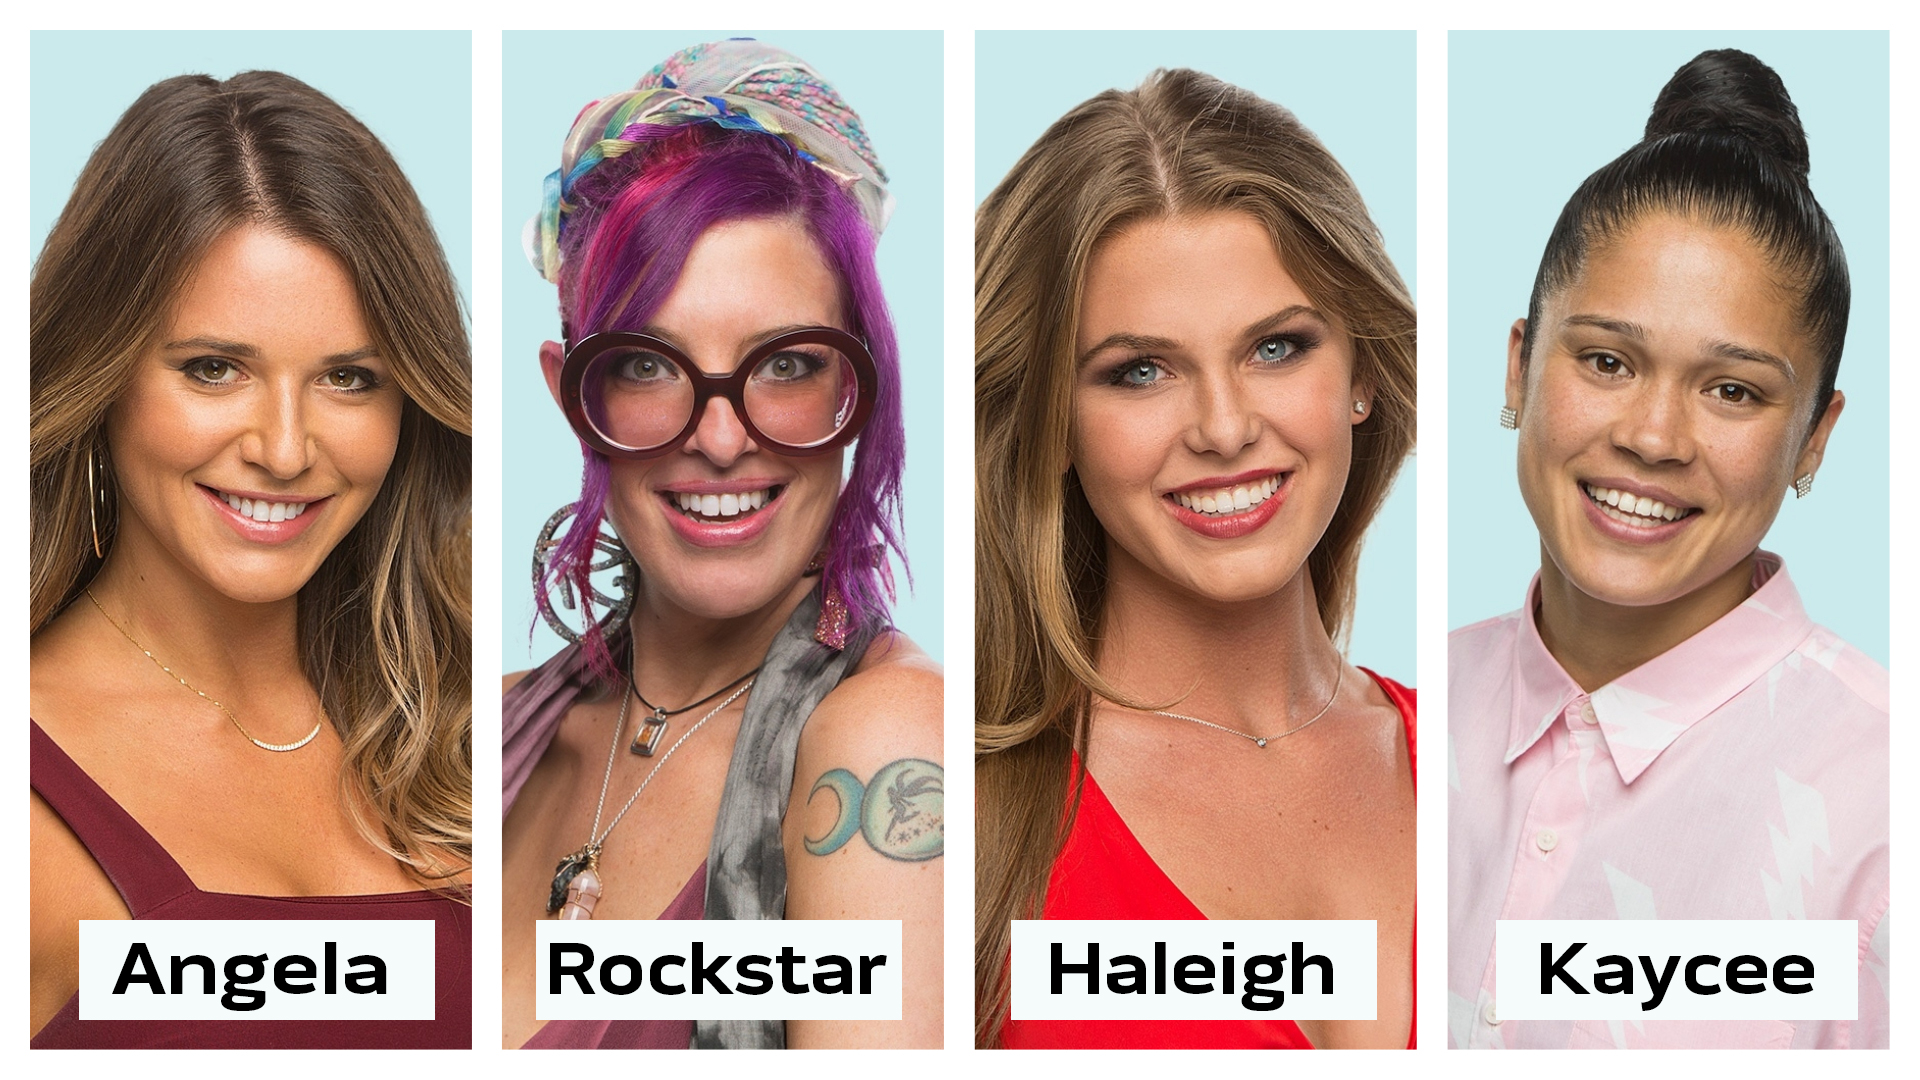 Who was the first Houseguest eliminated in the OTEV competition?